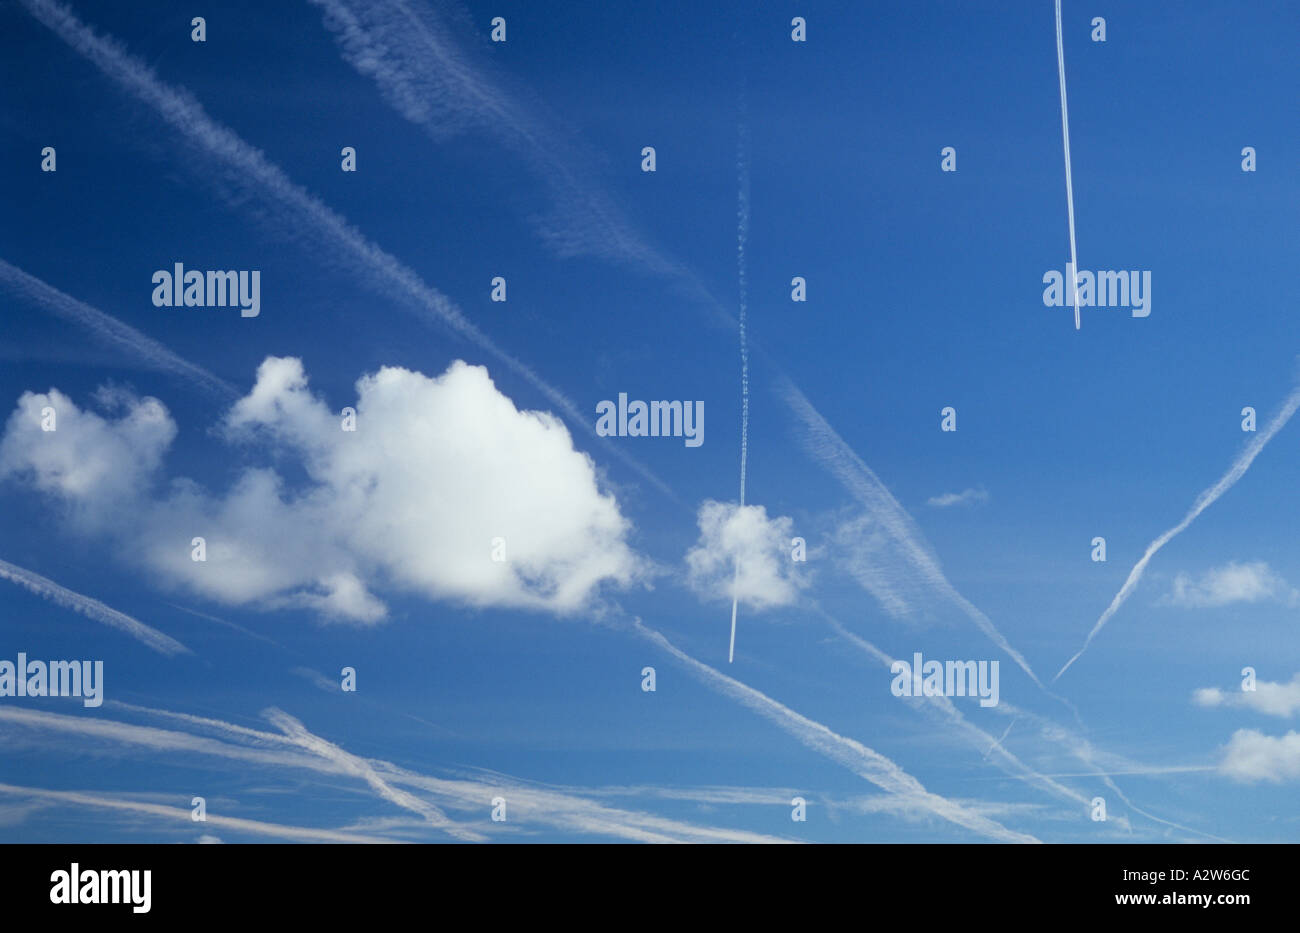 Blue sky crowded with vapour trails or contrails recent and current and with small cumulus clouds Stock Photo